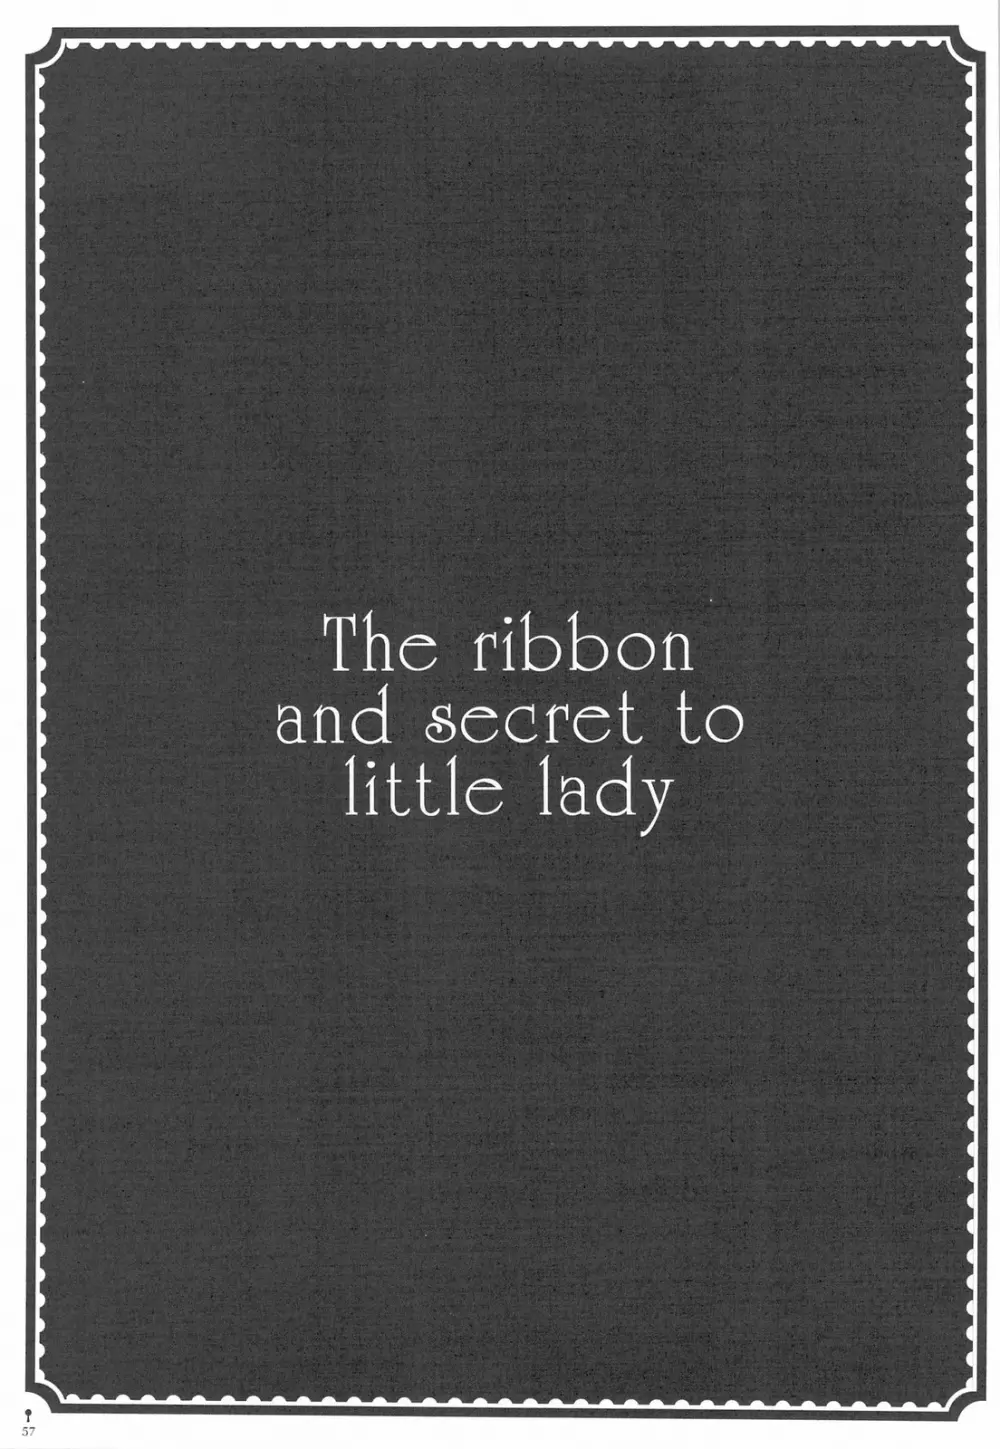 The ribbon and secret to little lady 59ページ